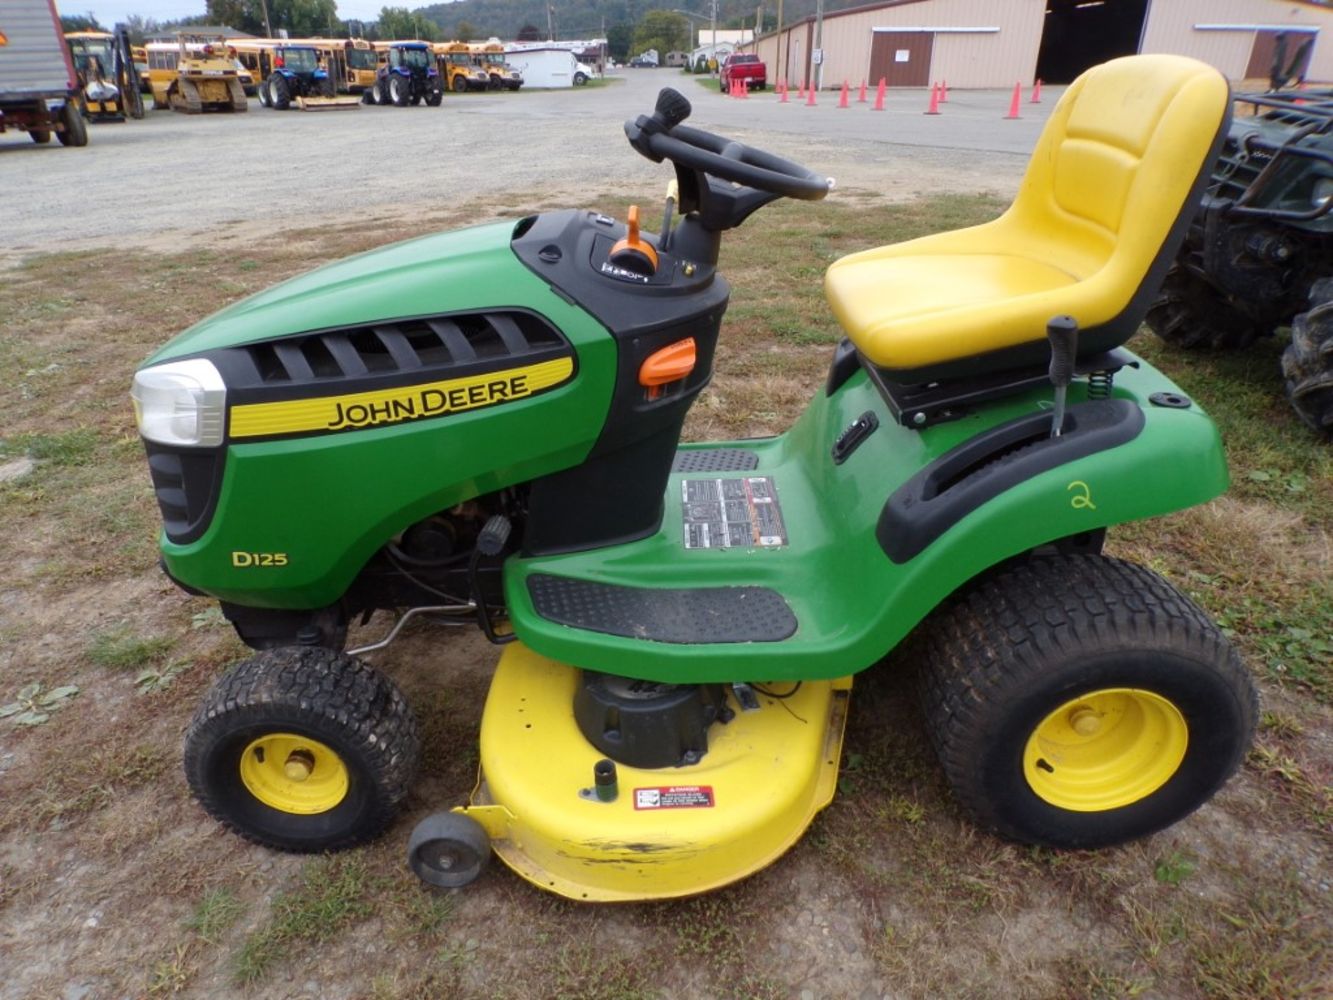 Ring 1 - LOTS 1-499 - 18th Annual Absolute Consignment Equipment Auction, Plus – Surplus Vehicles And School Bus Auction